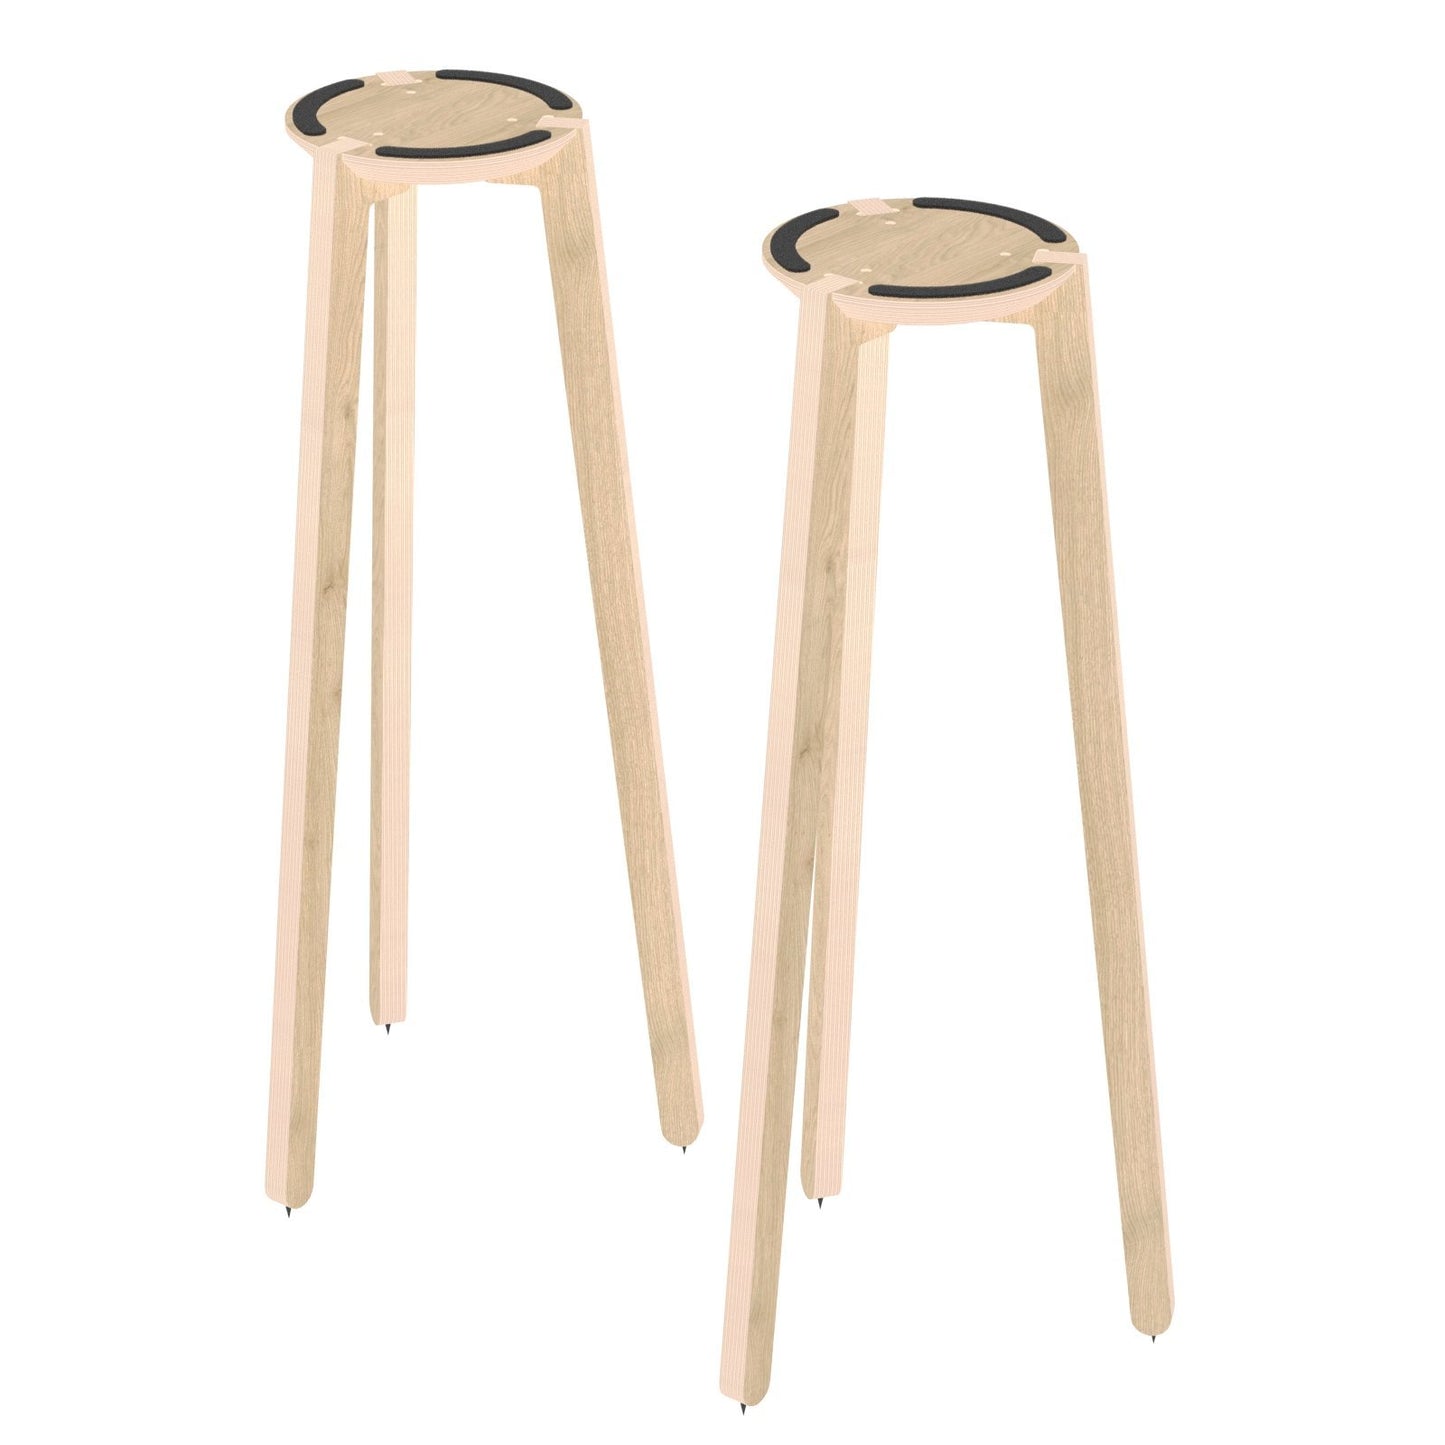 HABIB/CO - Tripod Speaker Stand Pair (natural) - 36" height - 9.5" base - Carpet Spikes : None